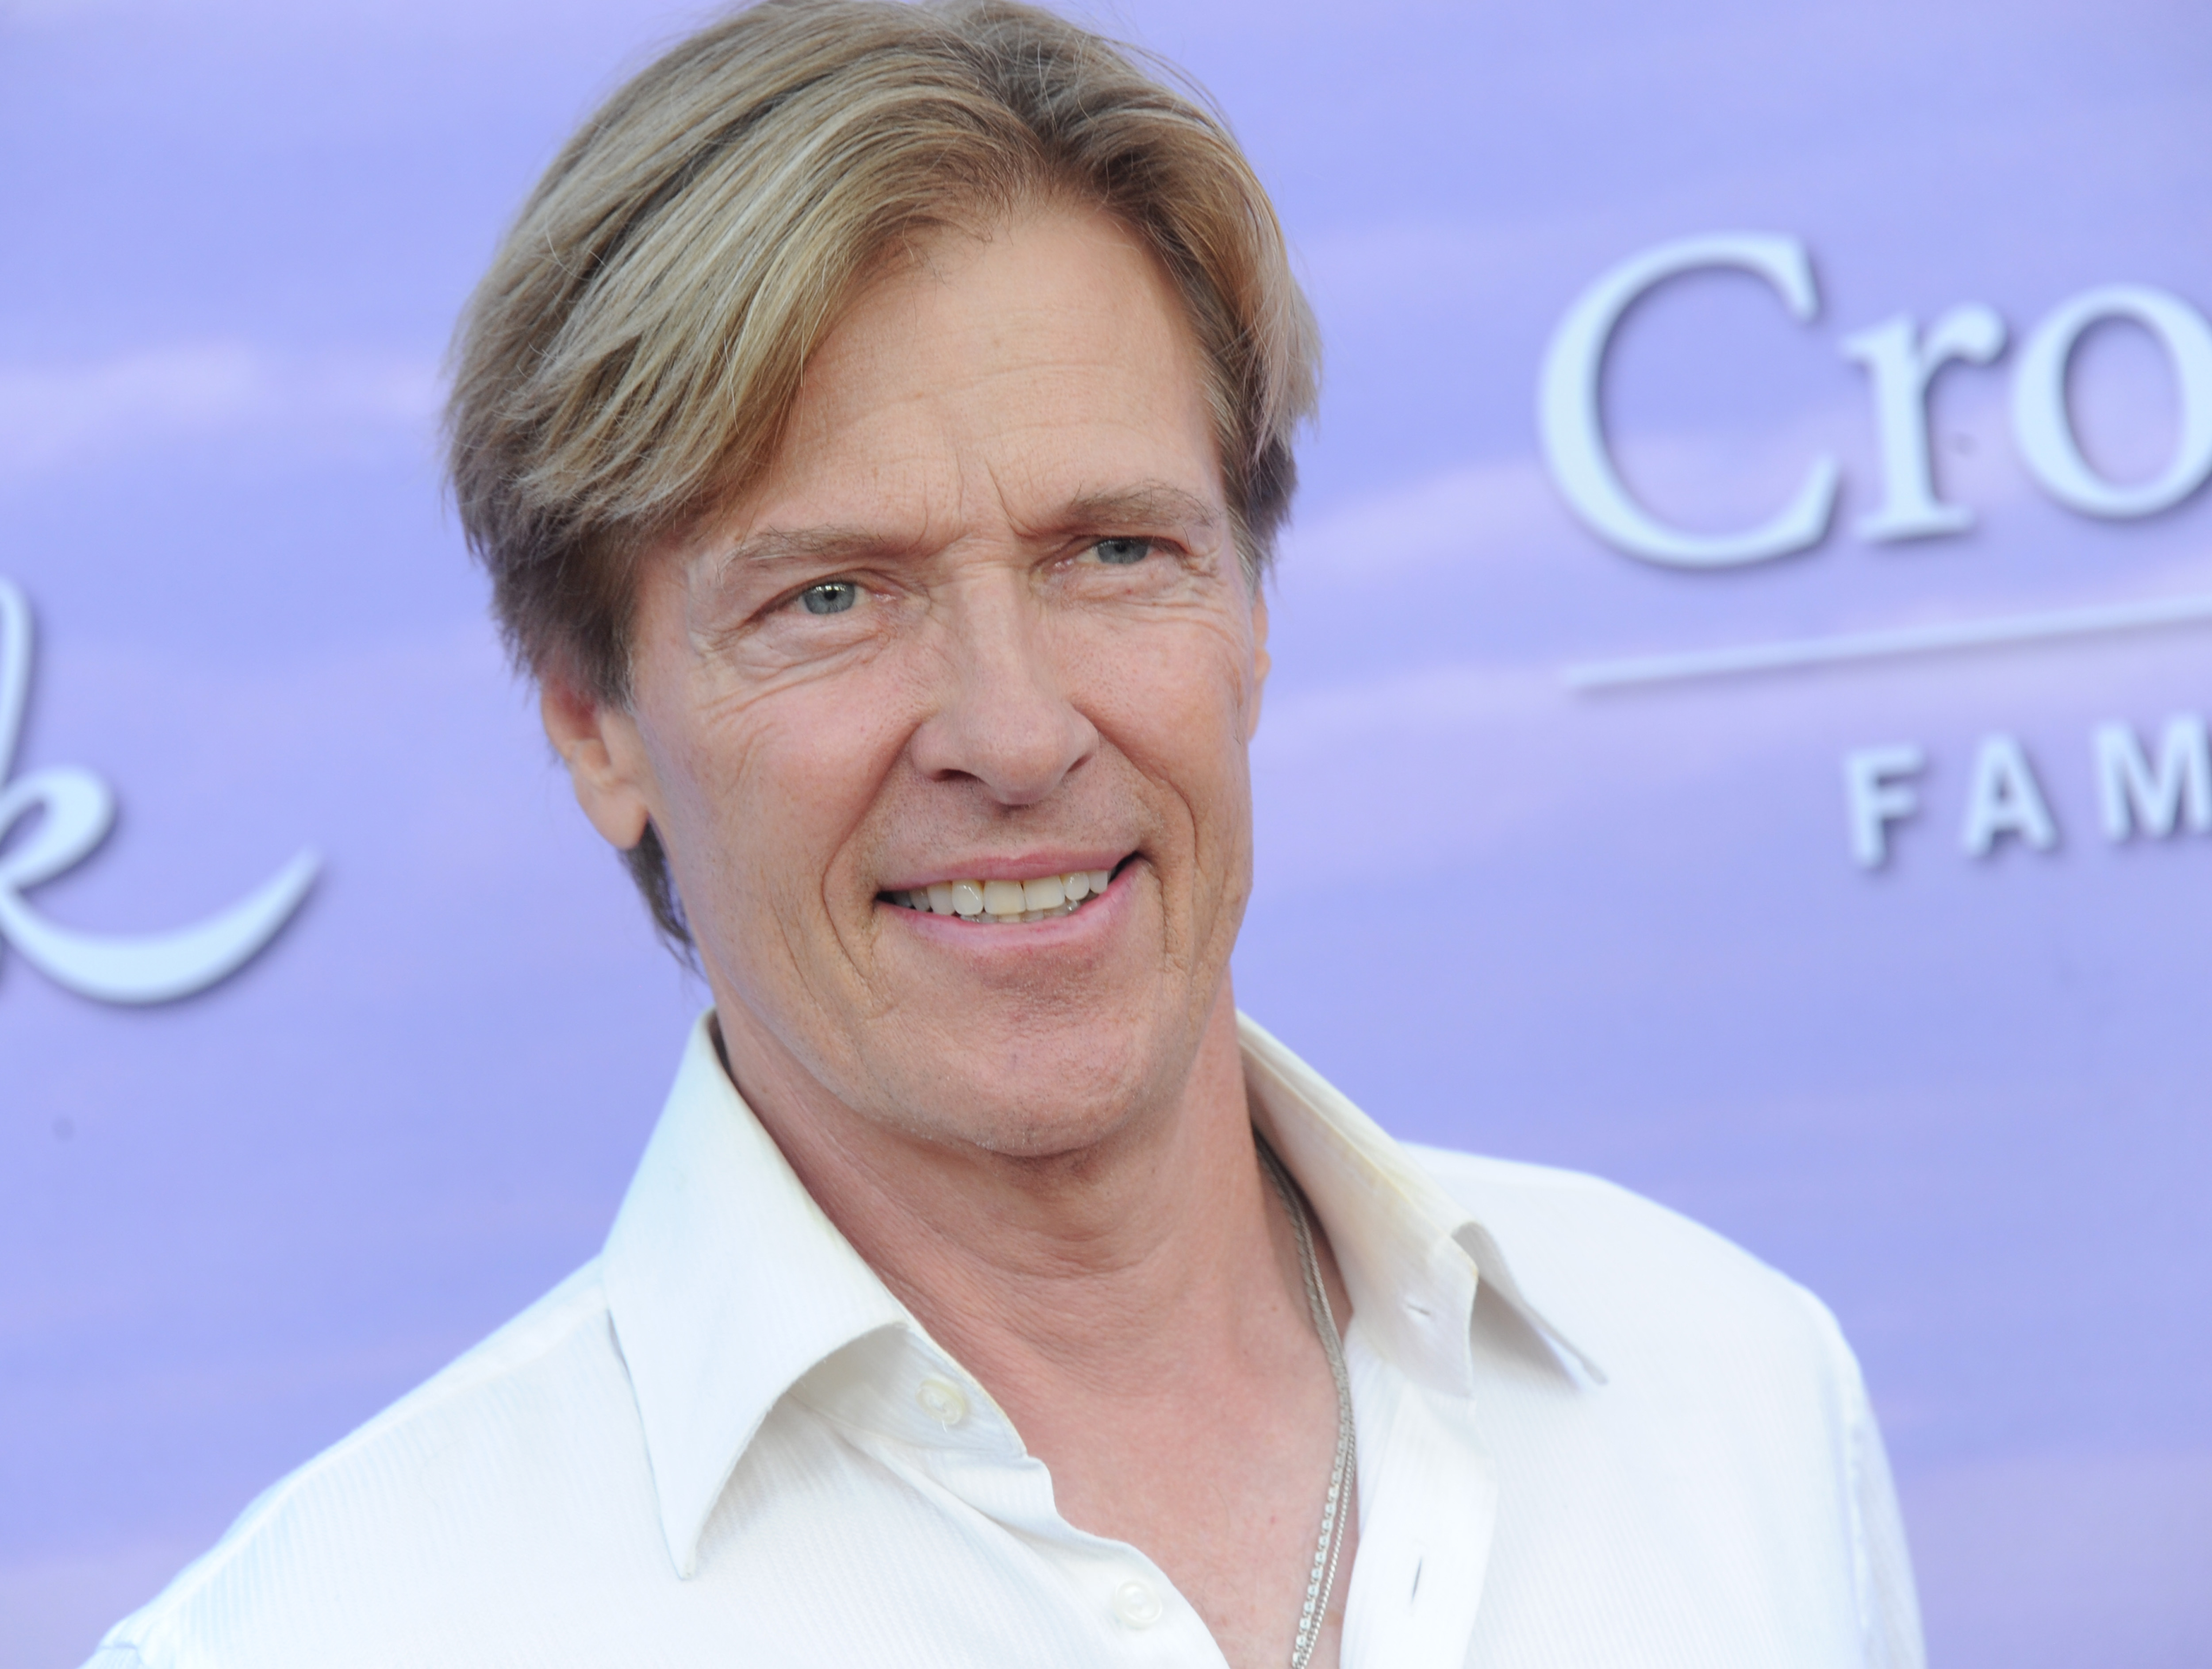 Jack Wagner of 'When Calls the Heart' wearing a white polo shirt